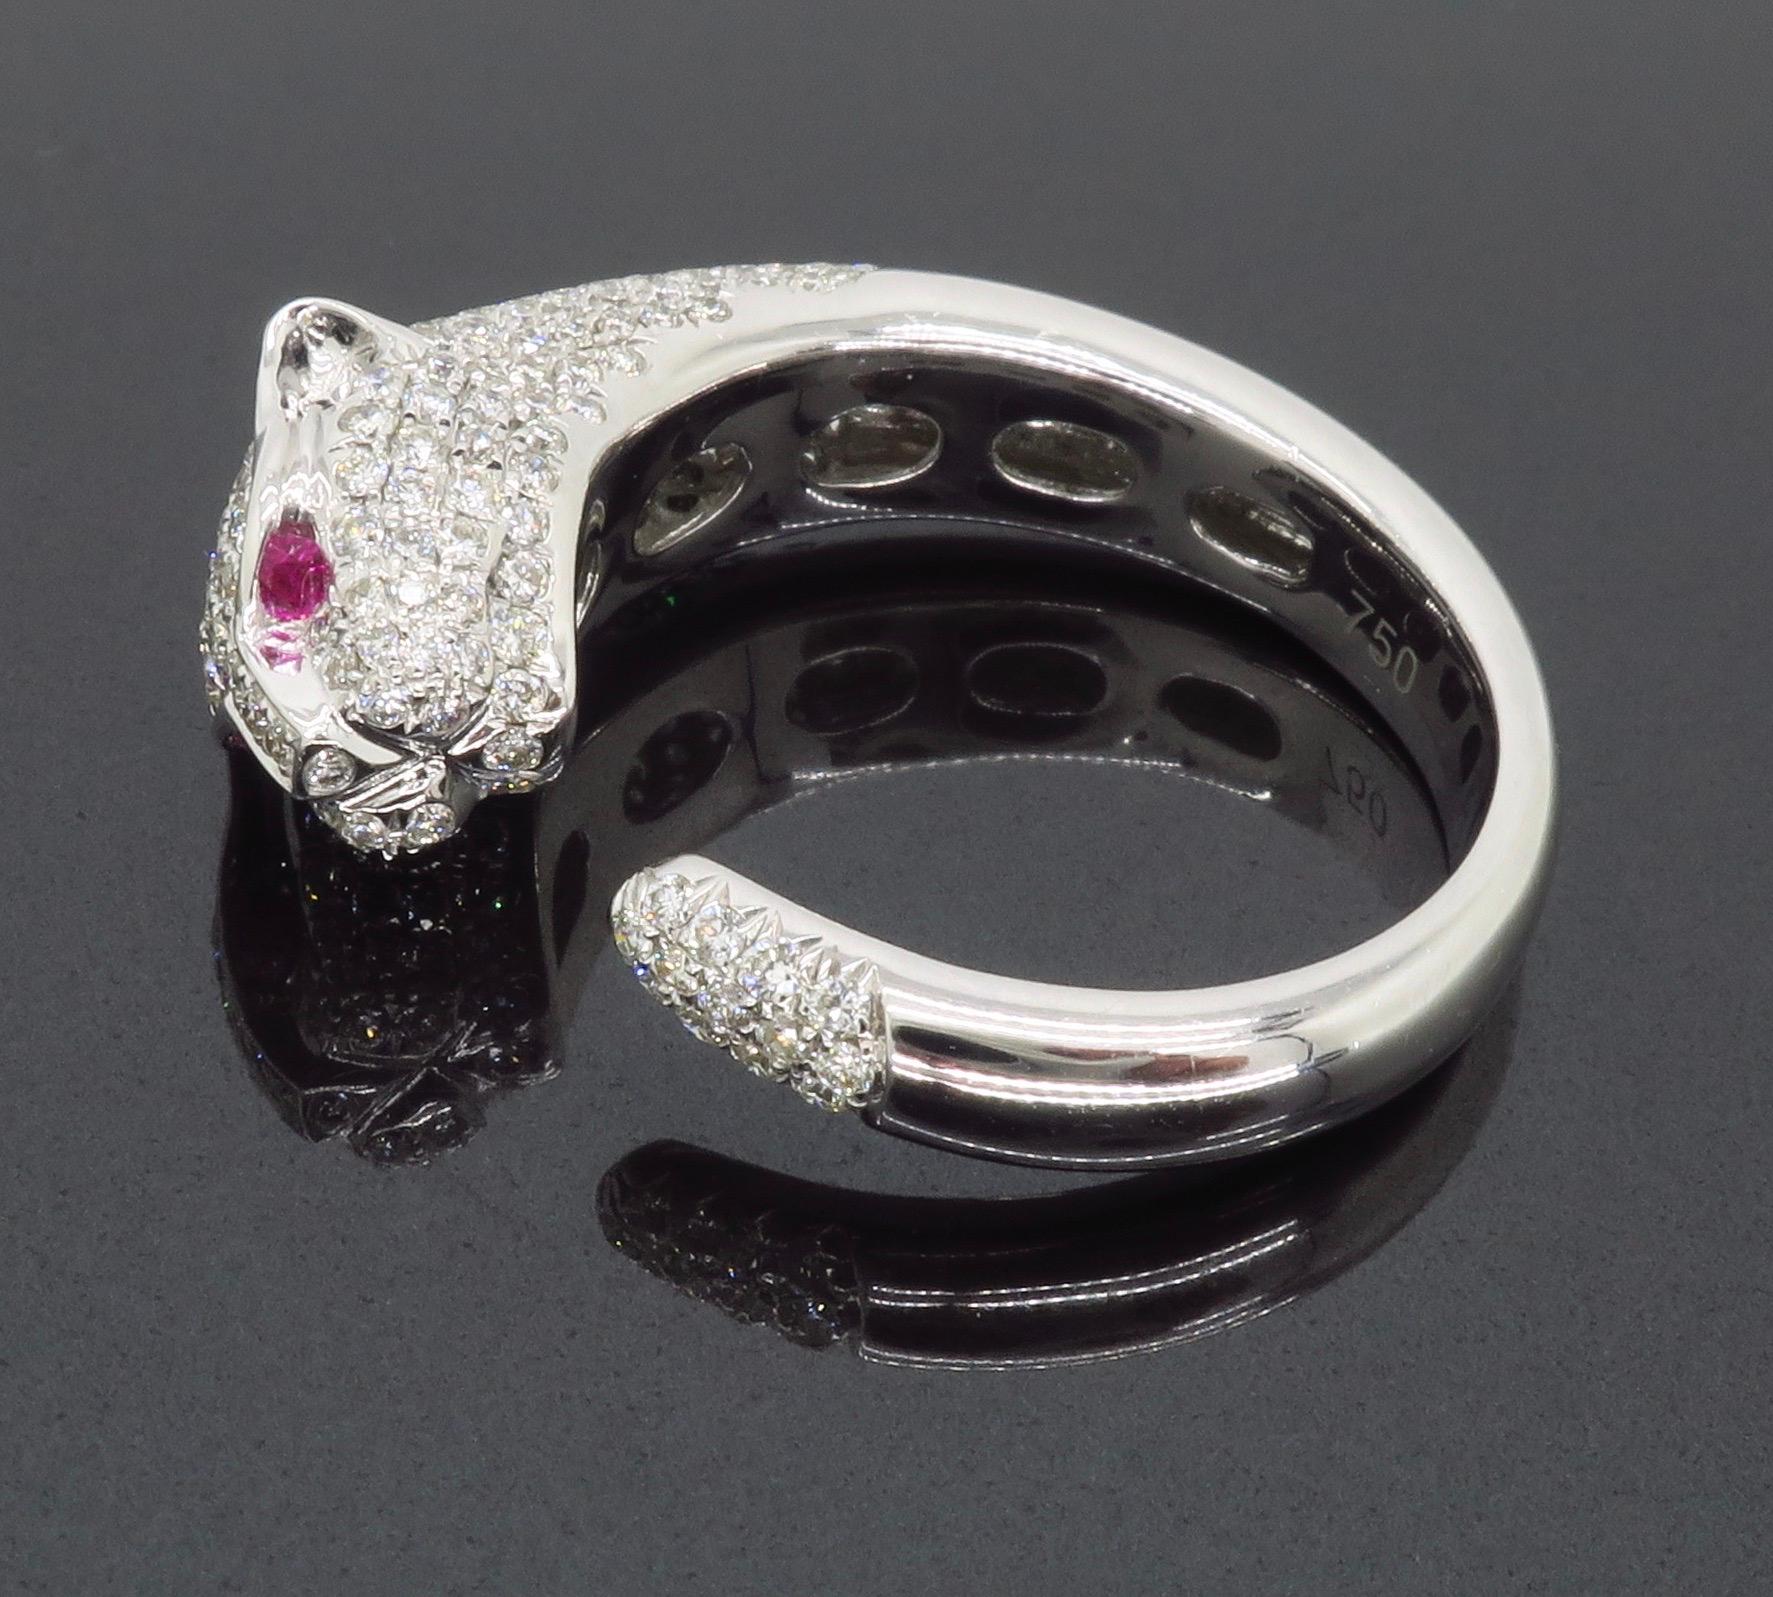 Panther Diamond and Ruby Ring Made in 18 Karat White Gold 13